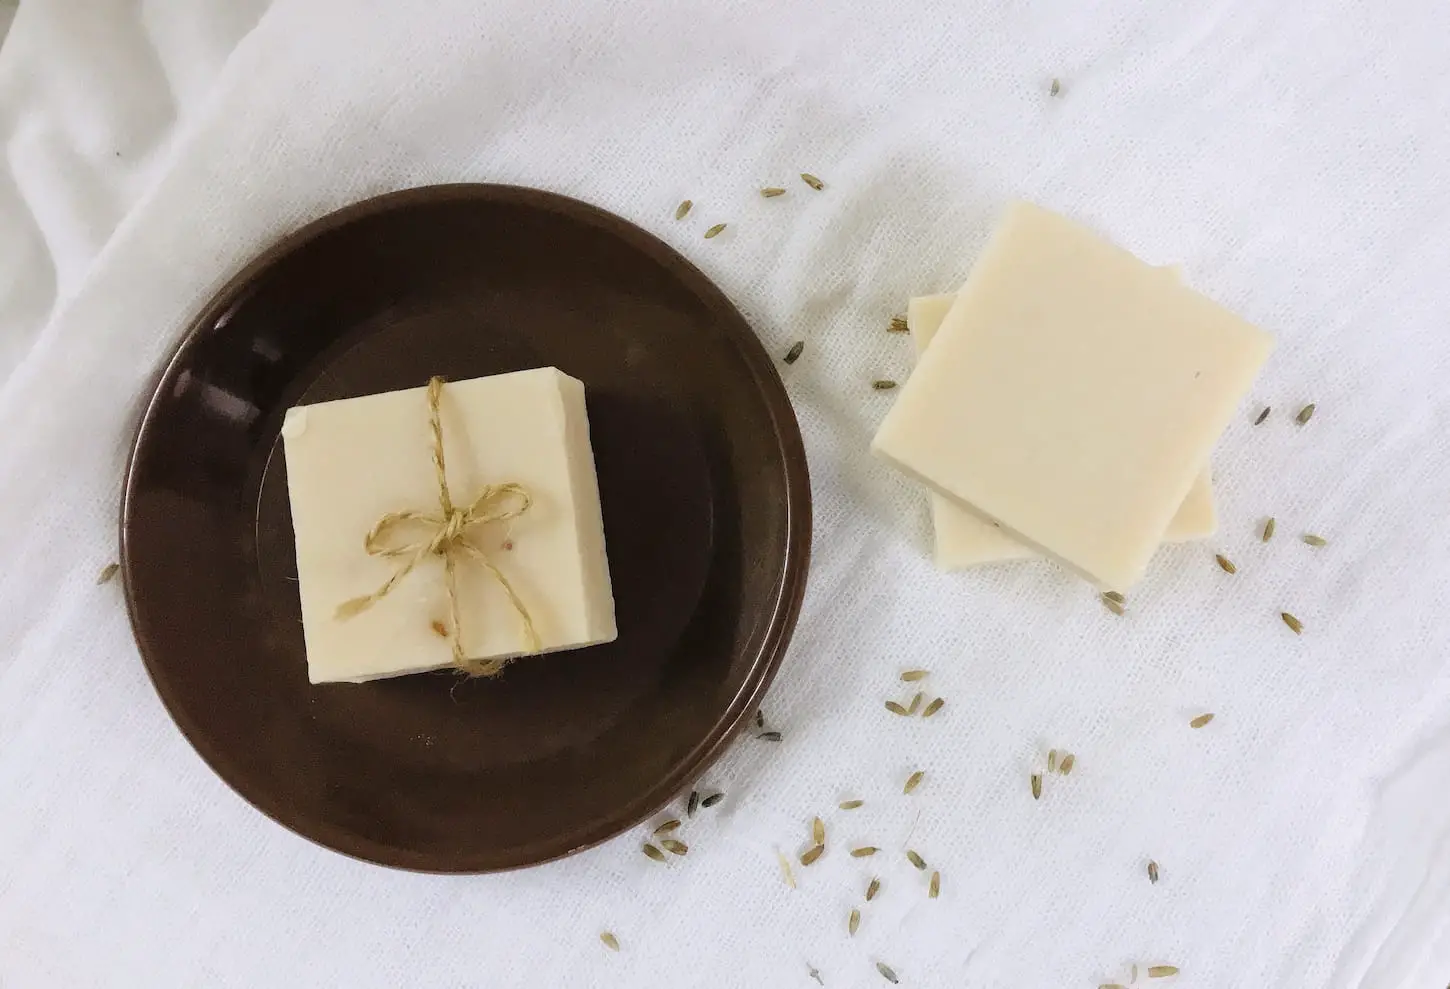 An image of handmade soap made with fresh milk.